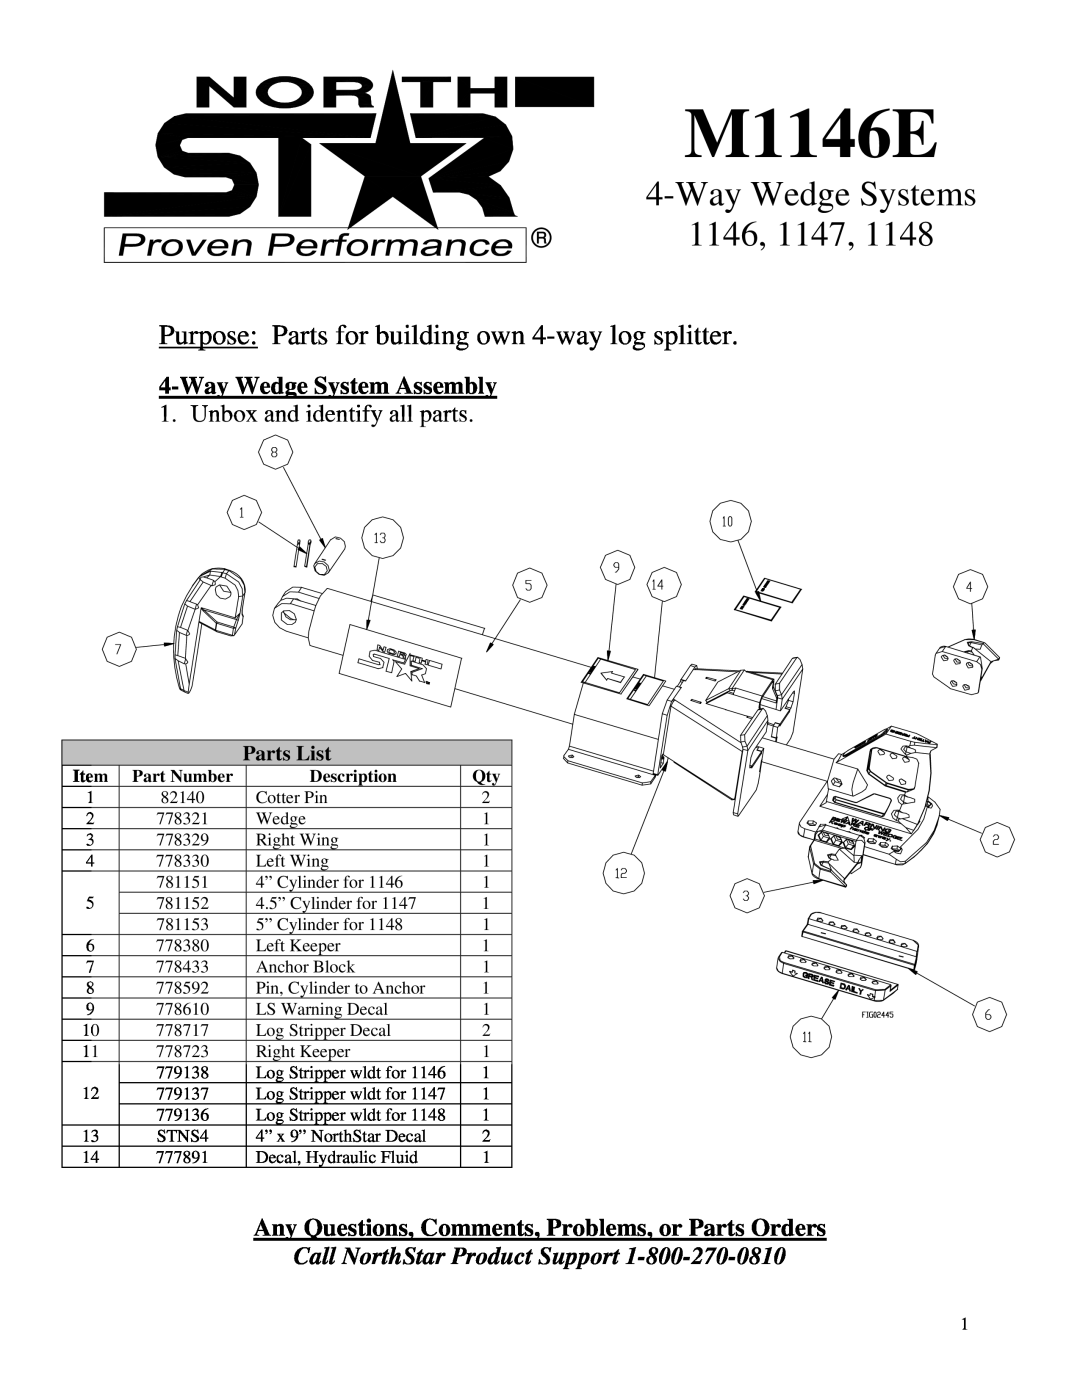 North Star M1146E manual WayWedge Systems, Purpose Parts for building own 4-waylog splitter, WayWedge System Assembly 